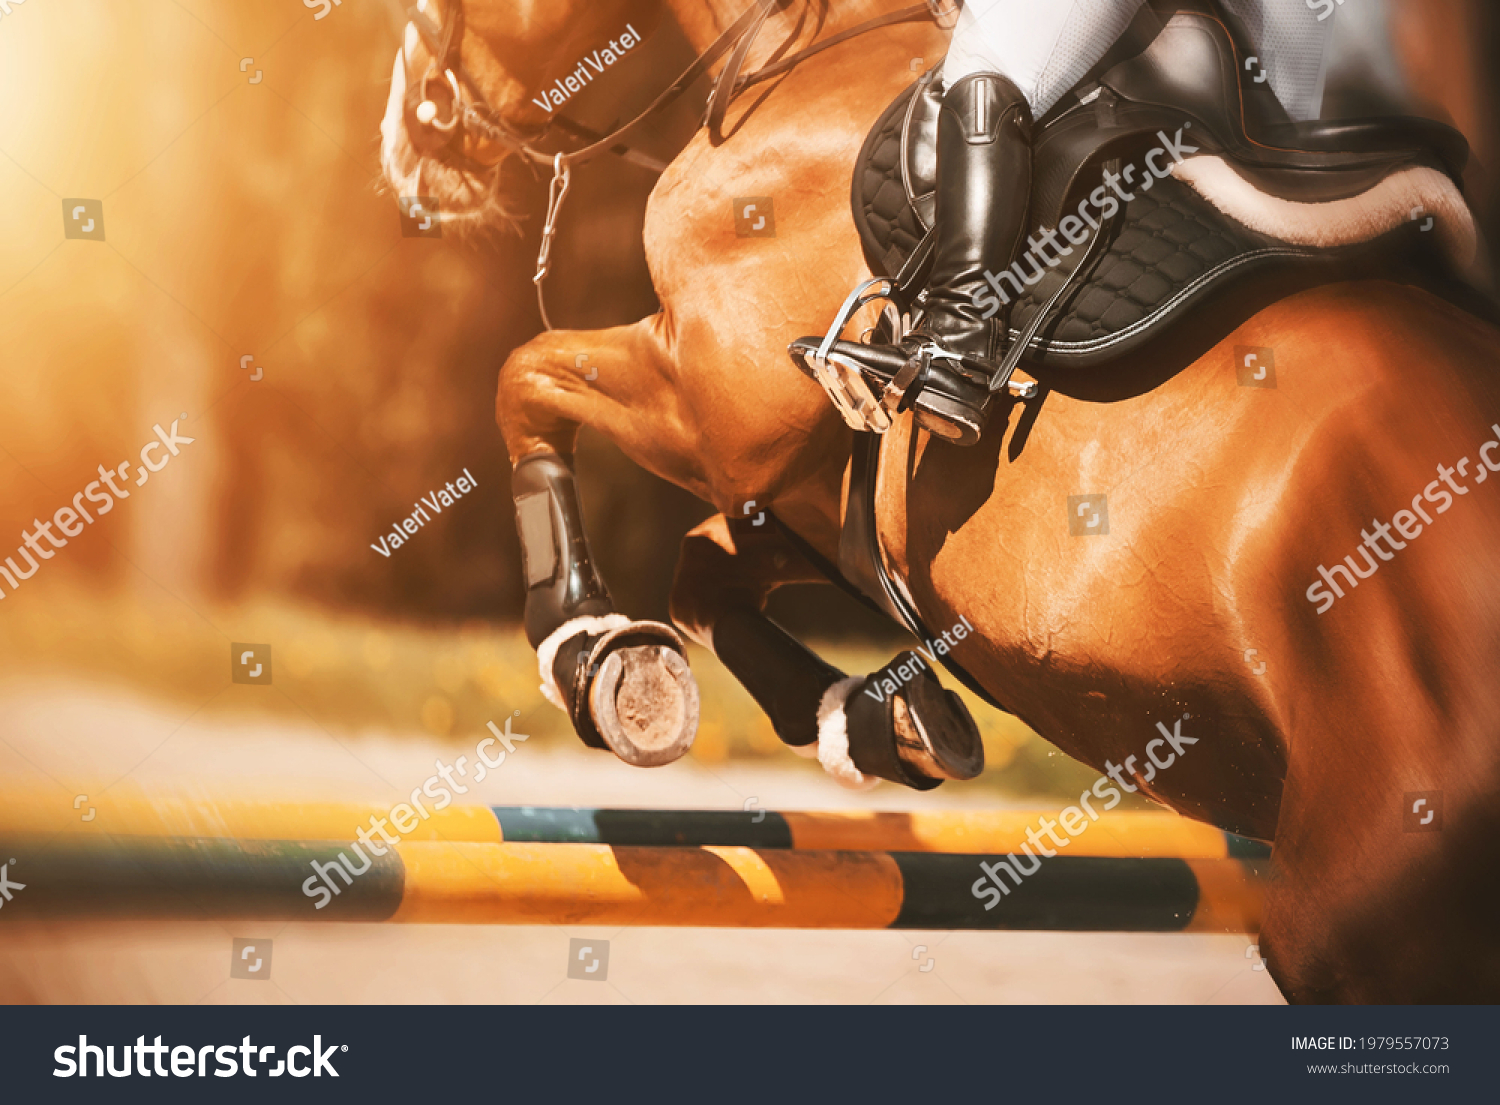 Rear view as a bay racehorse with a rider in the saddle quickly jumps over the high yellow barrier in a show jumping competition, illuminated by sunlight. Horse riding. Equestrian sports. #1979557073